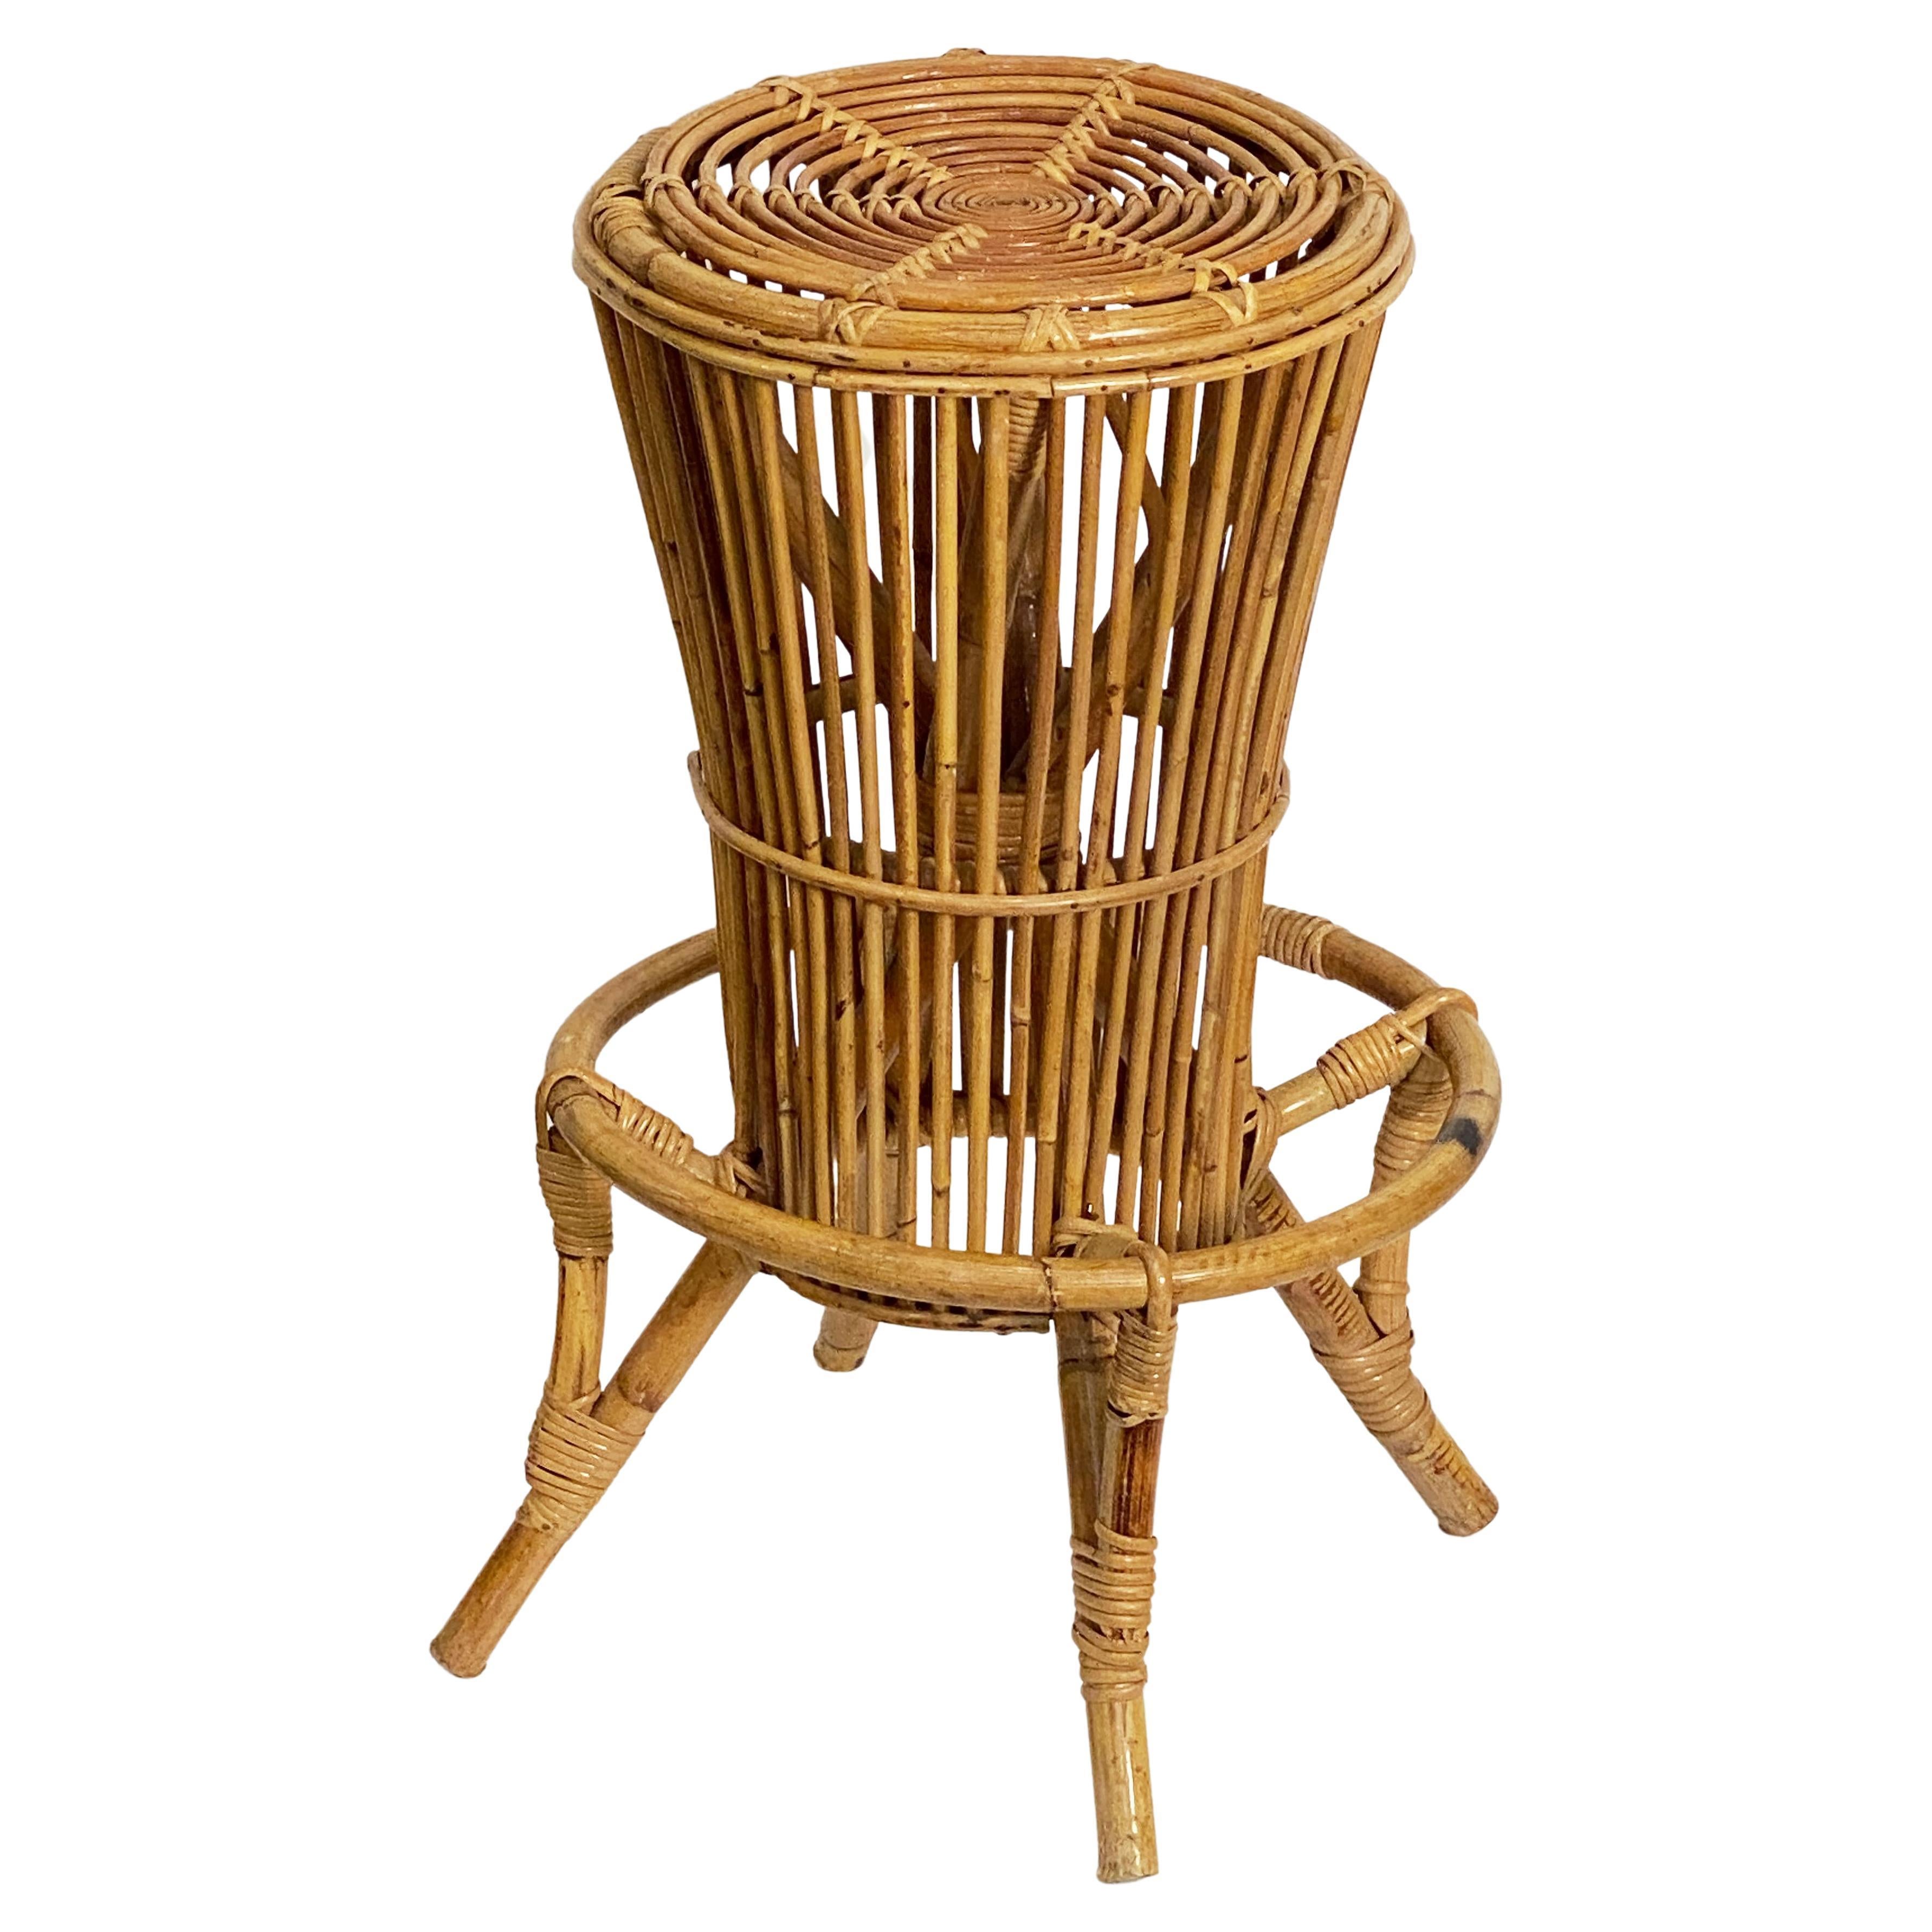 Italian Stool of Rattan and Bamboo from the Mid-20th Century